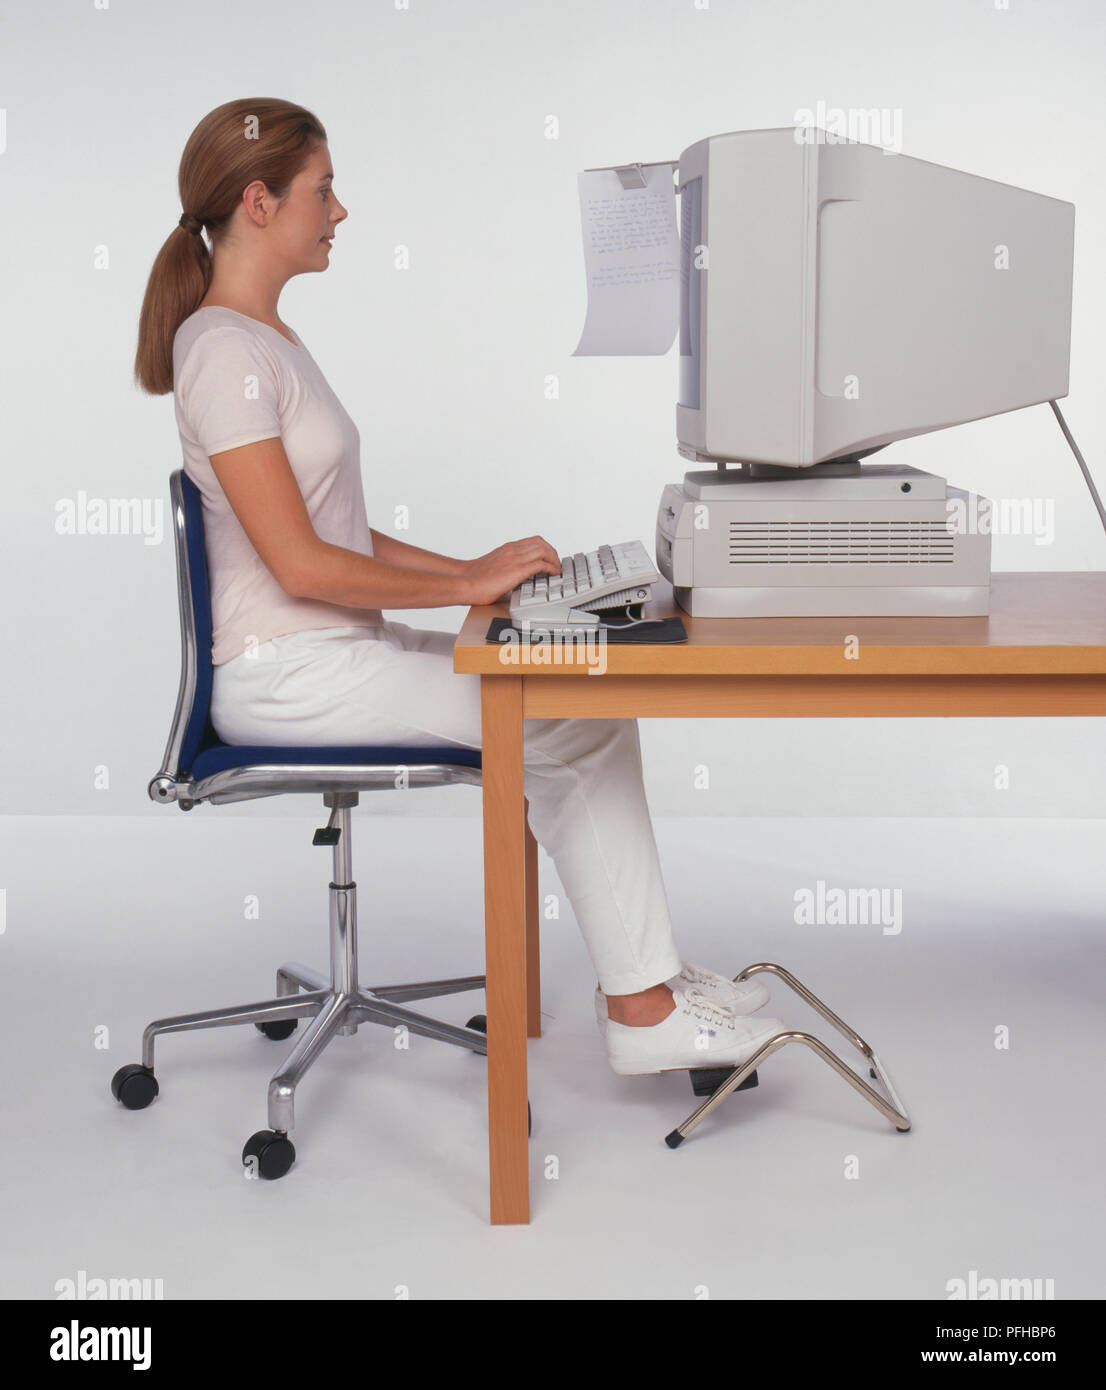 Woman sitting at a desk using a computer, feet on a footrest, side view Stock Photo